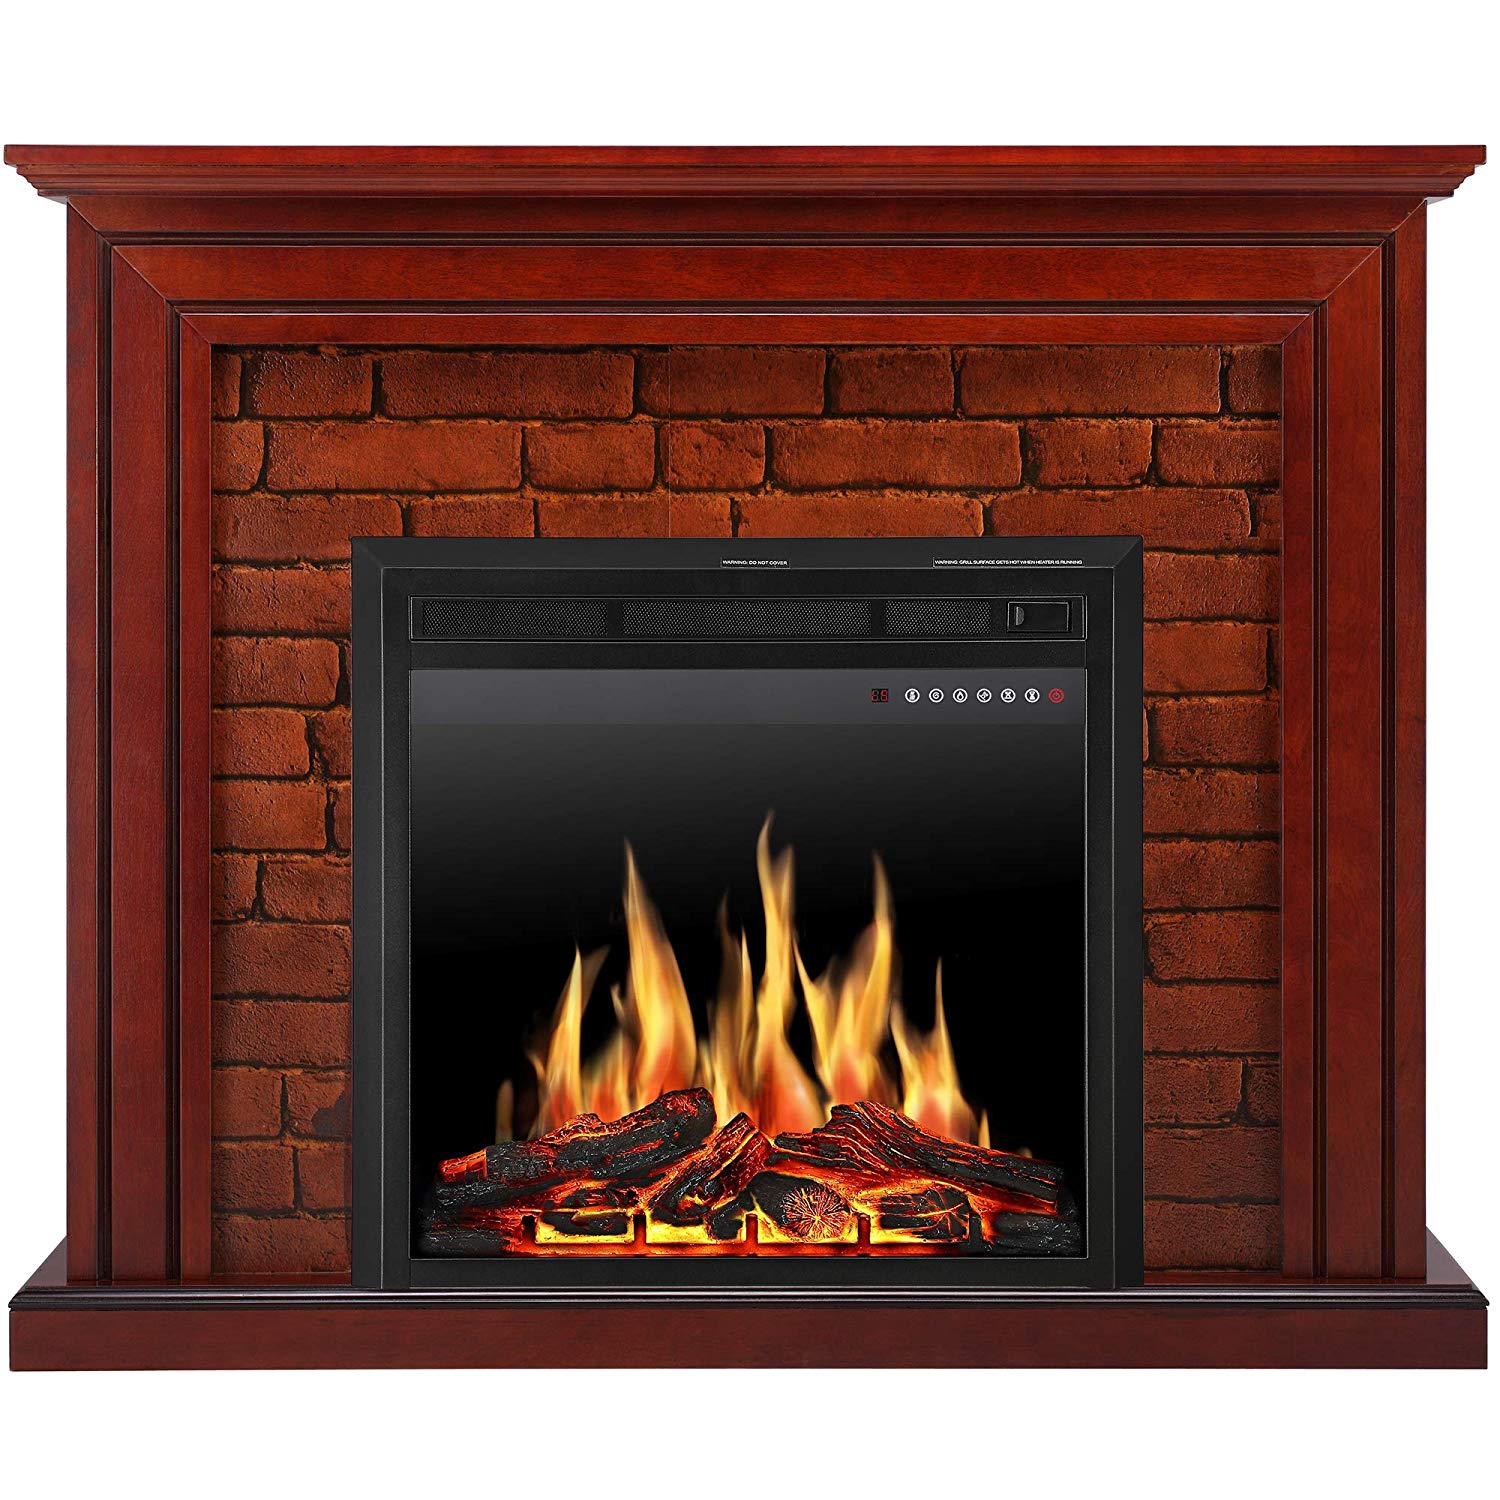 Fireplace Tv Stand Amazon Fresh Jamfly Electric Fireplace Mantel Package Traditional Brick Wall Design Heater with Remote Control and Led touch Screen Home Accent Furnishings